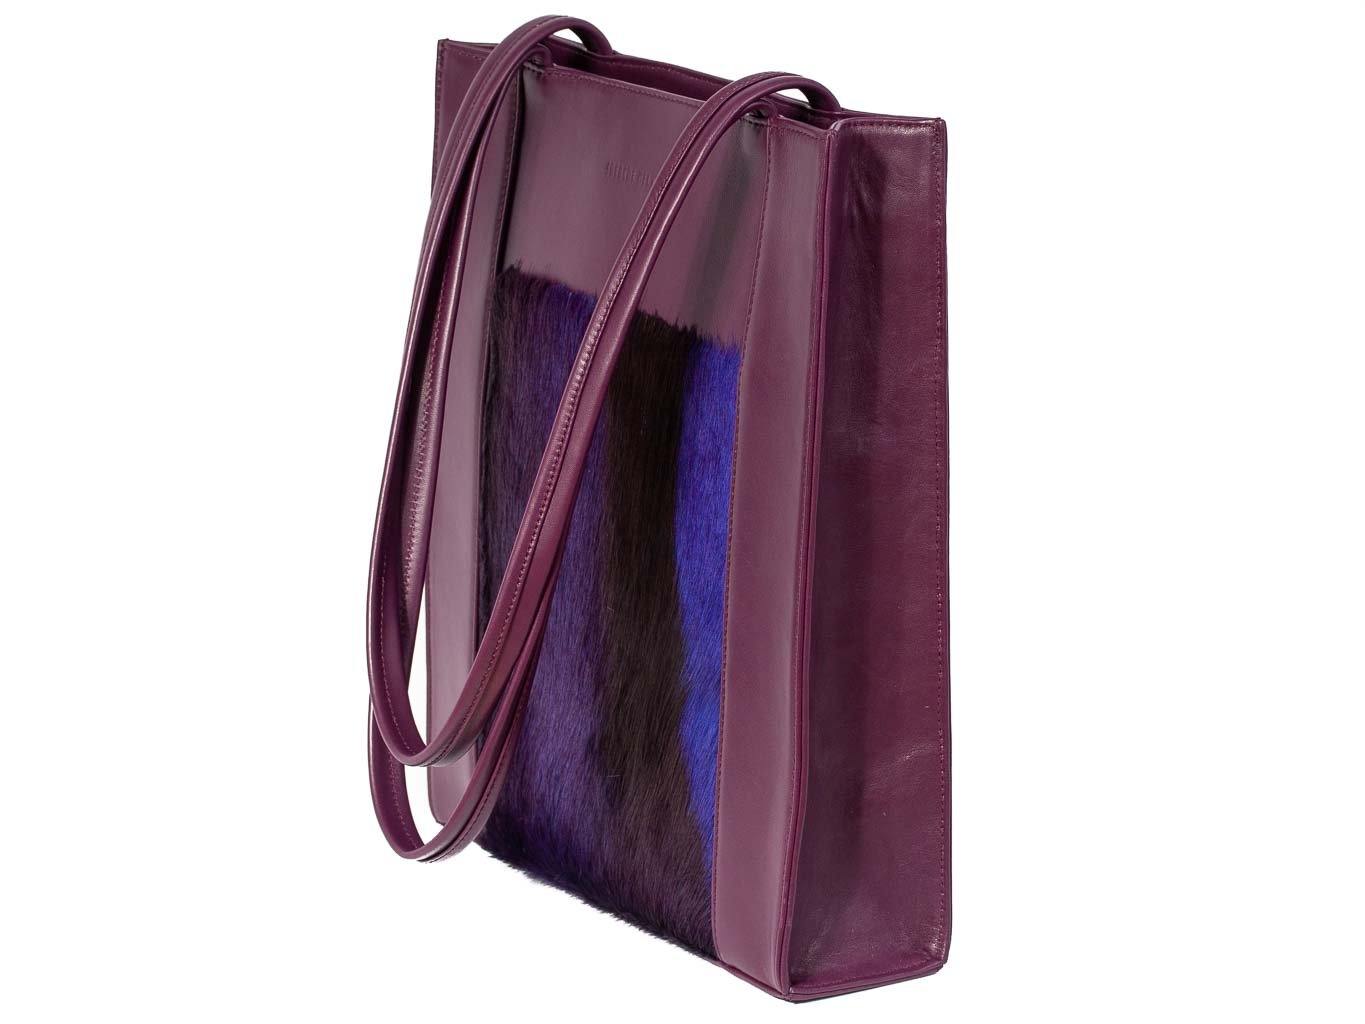 Tote Springbok Handbag in Deep Purple with a stripe feature by Sherene Melinda side angle strap